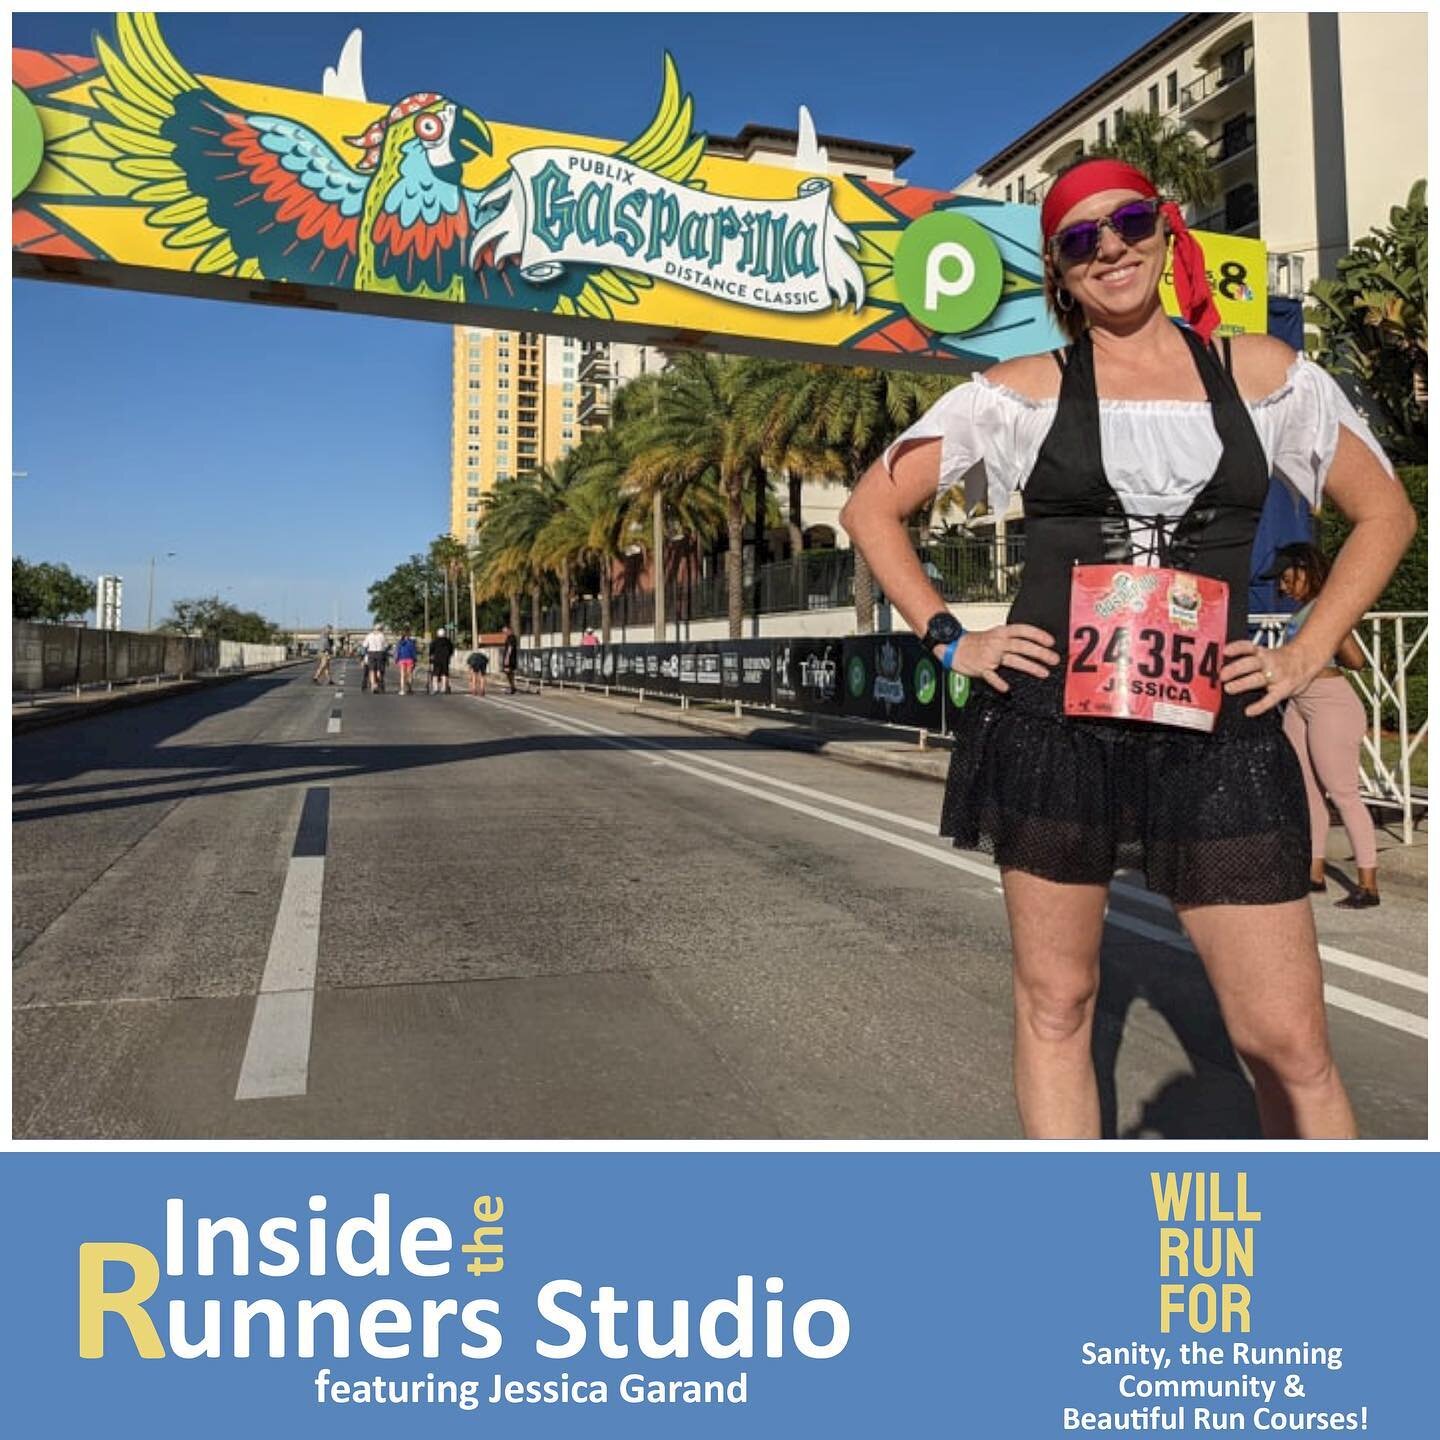 Today we are back Inside the Runner Studio with Jessica! She loves costumes and runs for her sanity, her love of the running community and finding beautiful courses to run on, both when racing and not!
.
We're excited to continue getting to know memb